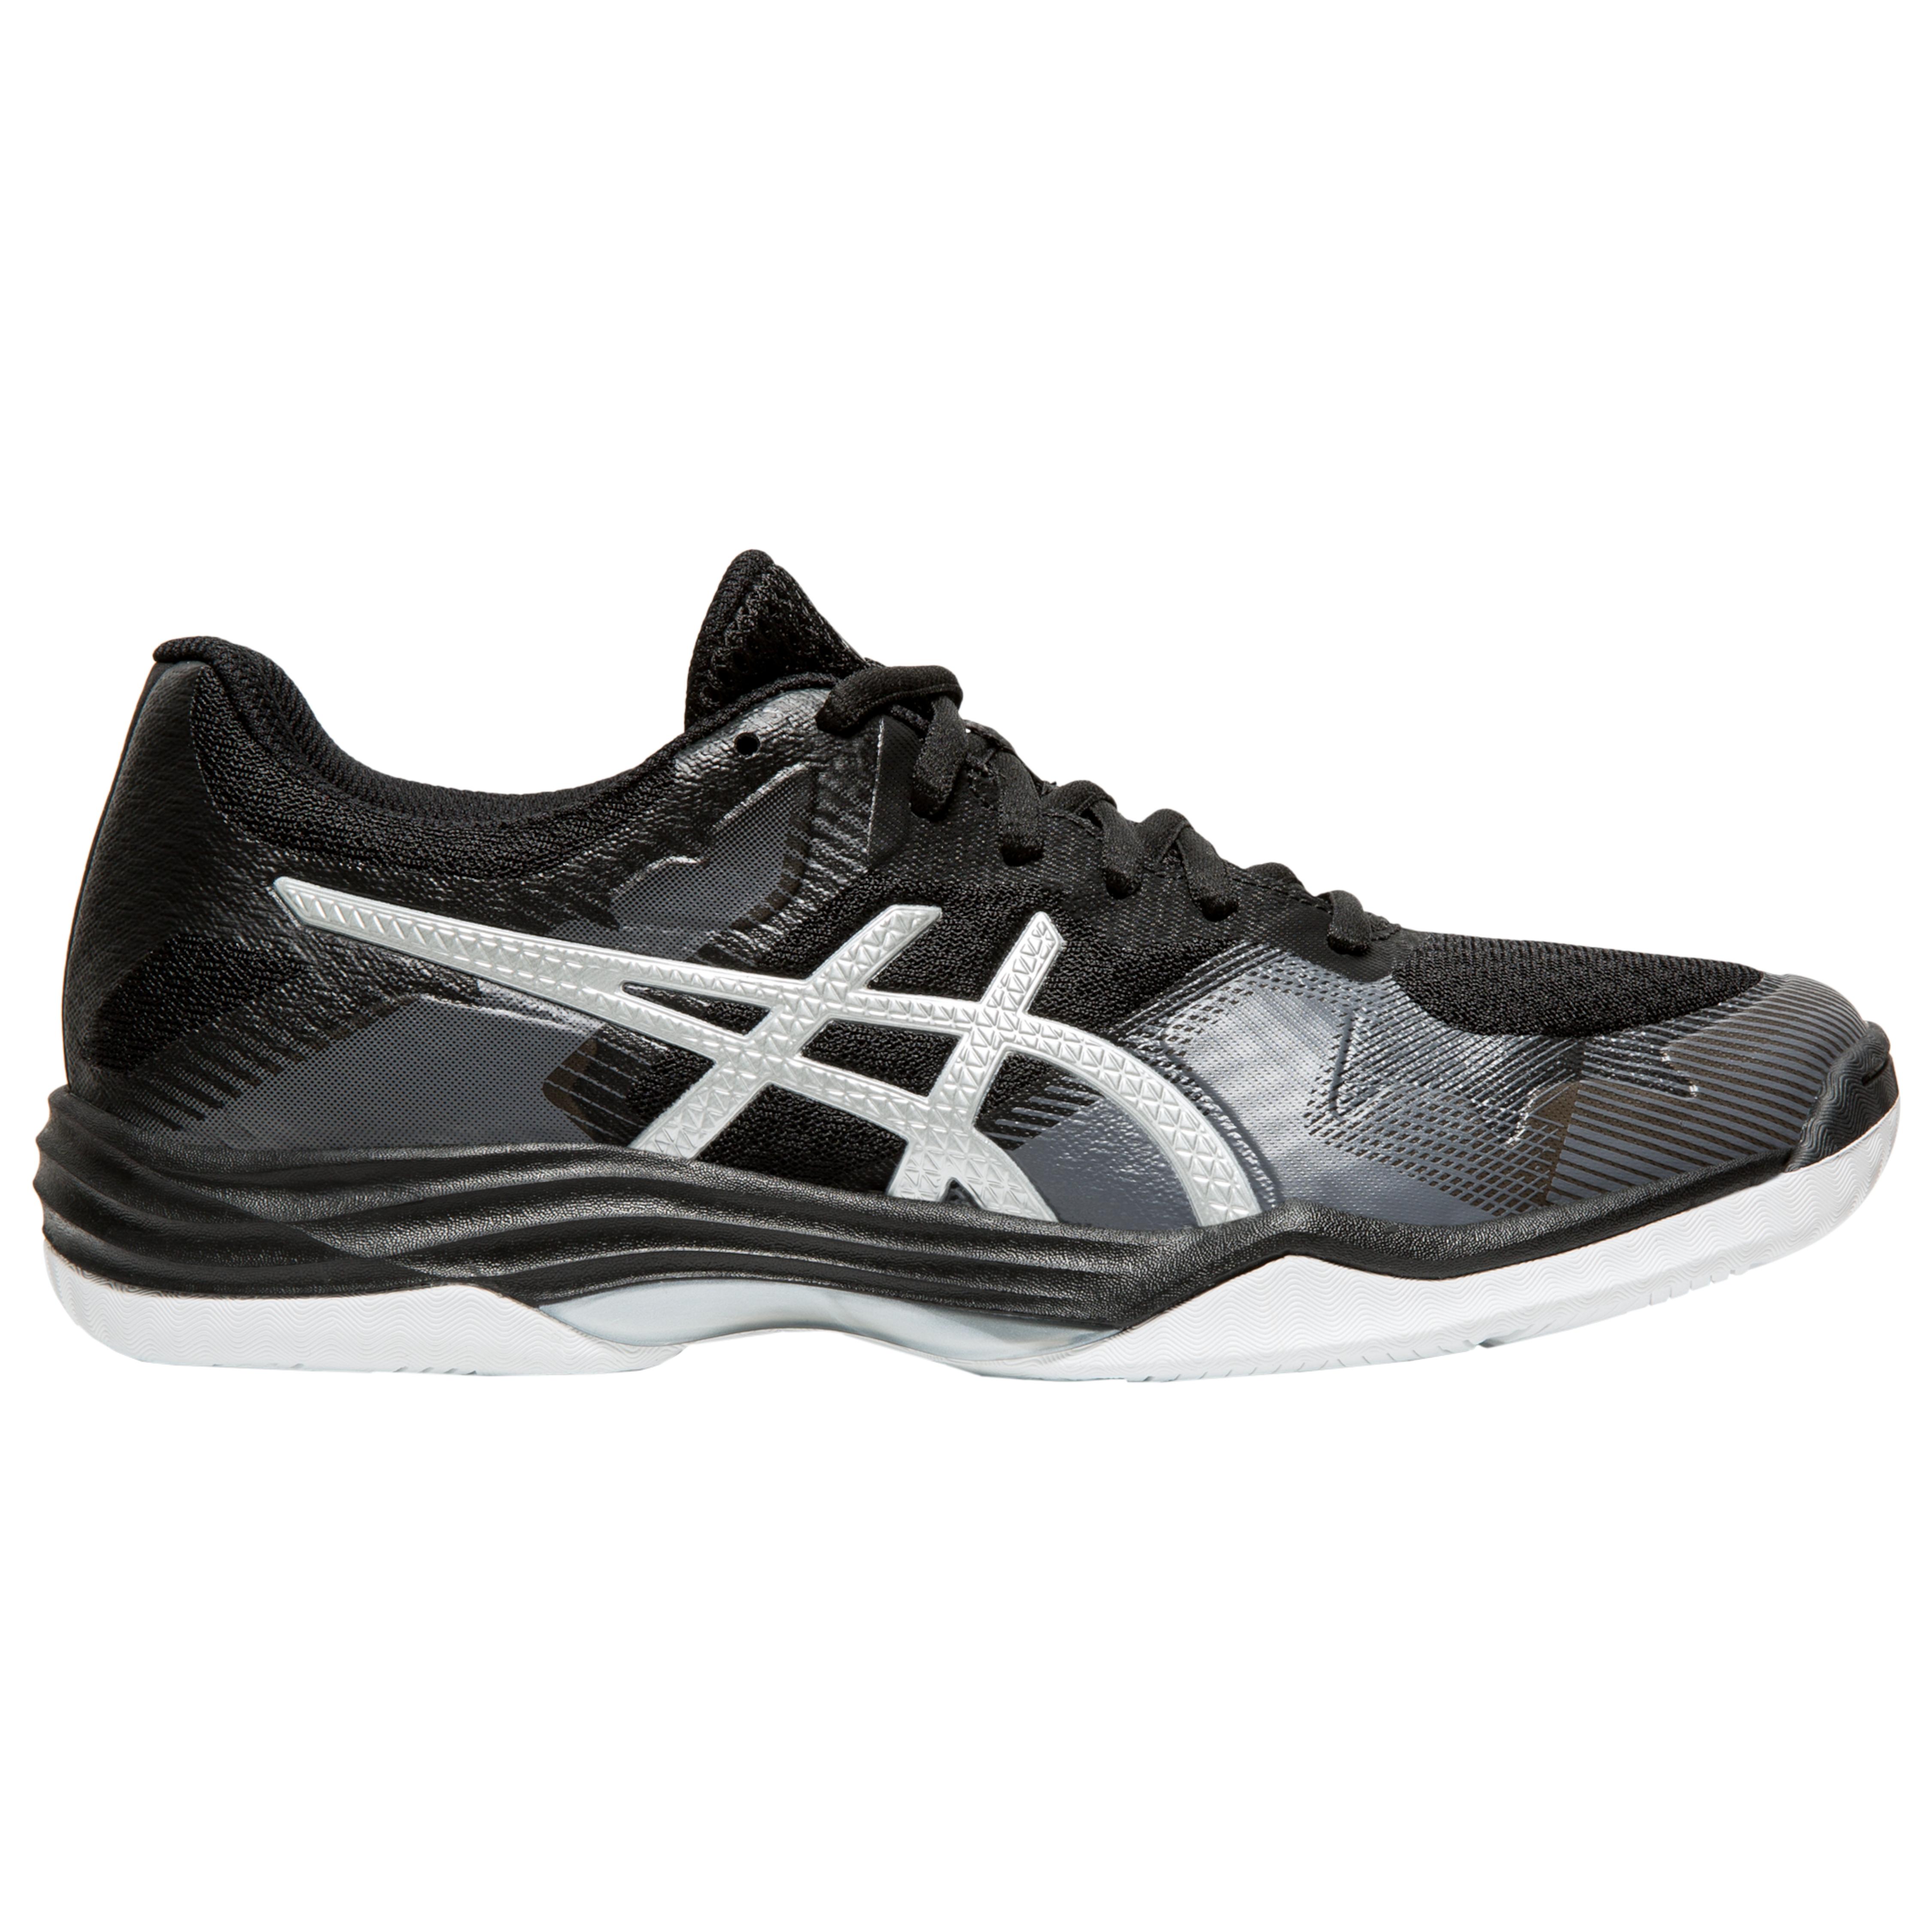 Asics Synthetic Gel-tactic 2 in Black/Silver (Black) - Lyst